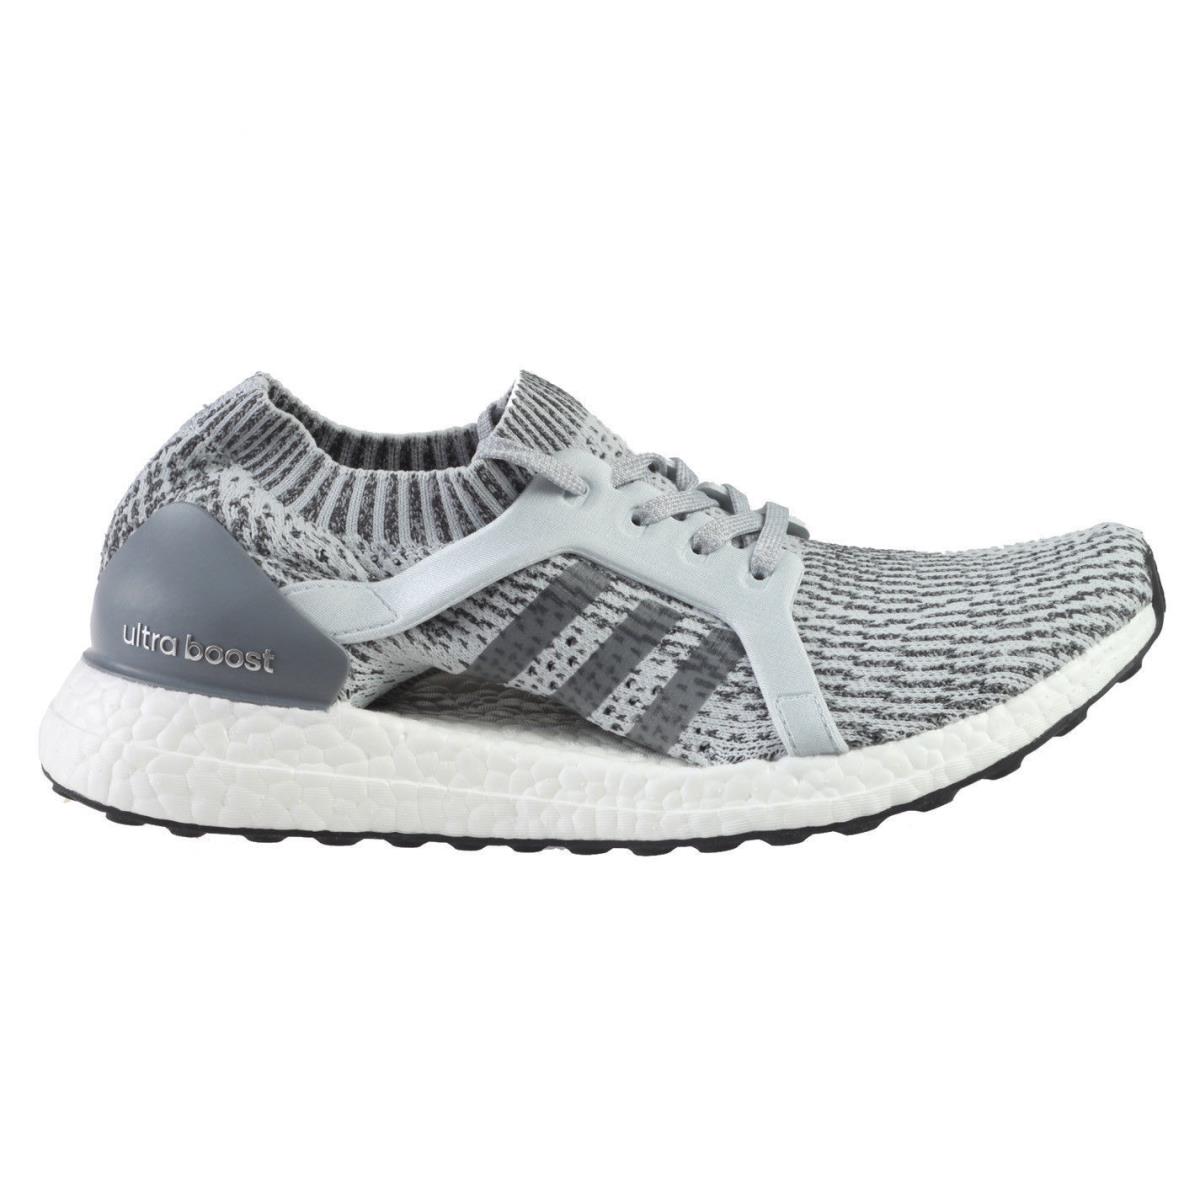 Adidas Ultraboost X Grey Silver Running Sneakers BB1695 635 Women`s Shoes